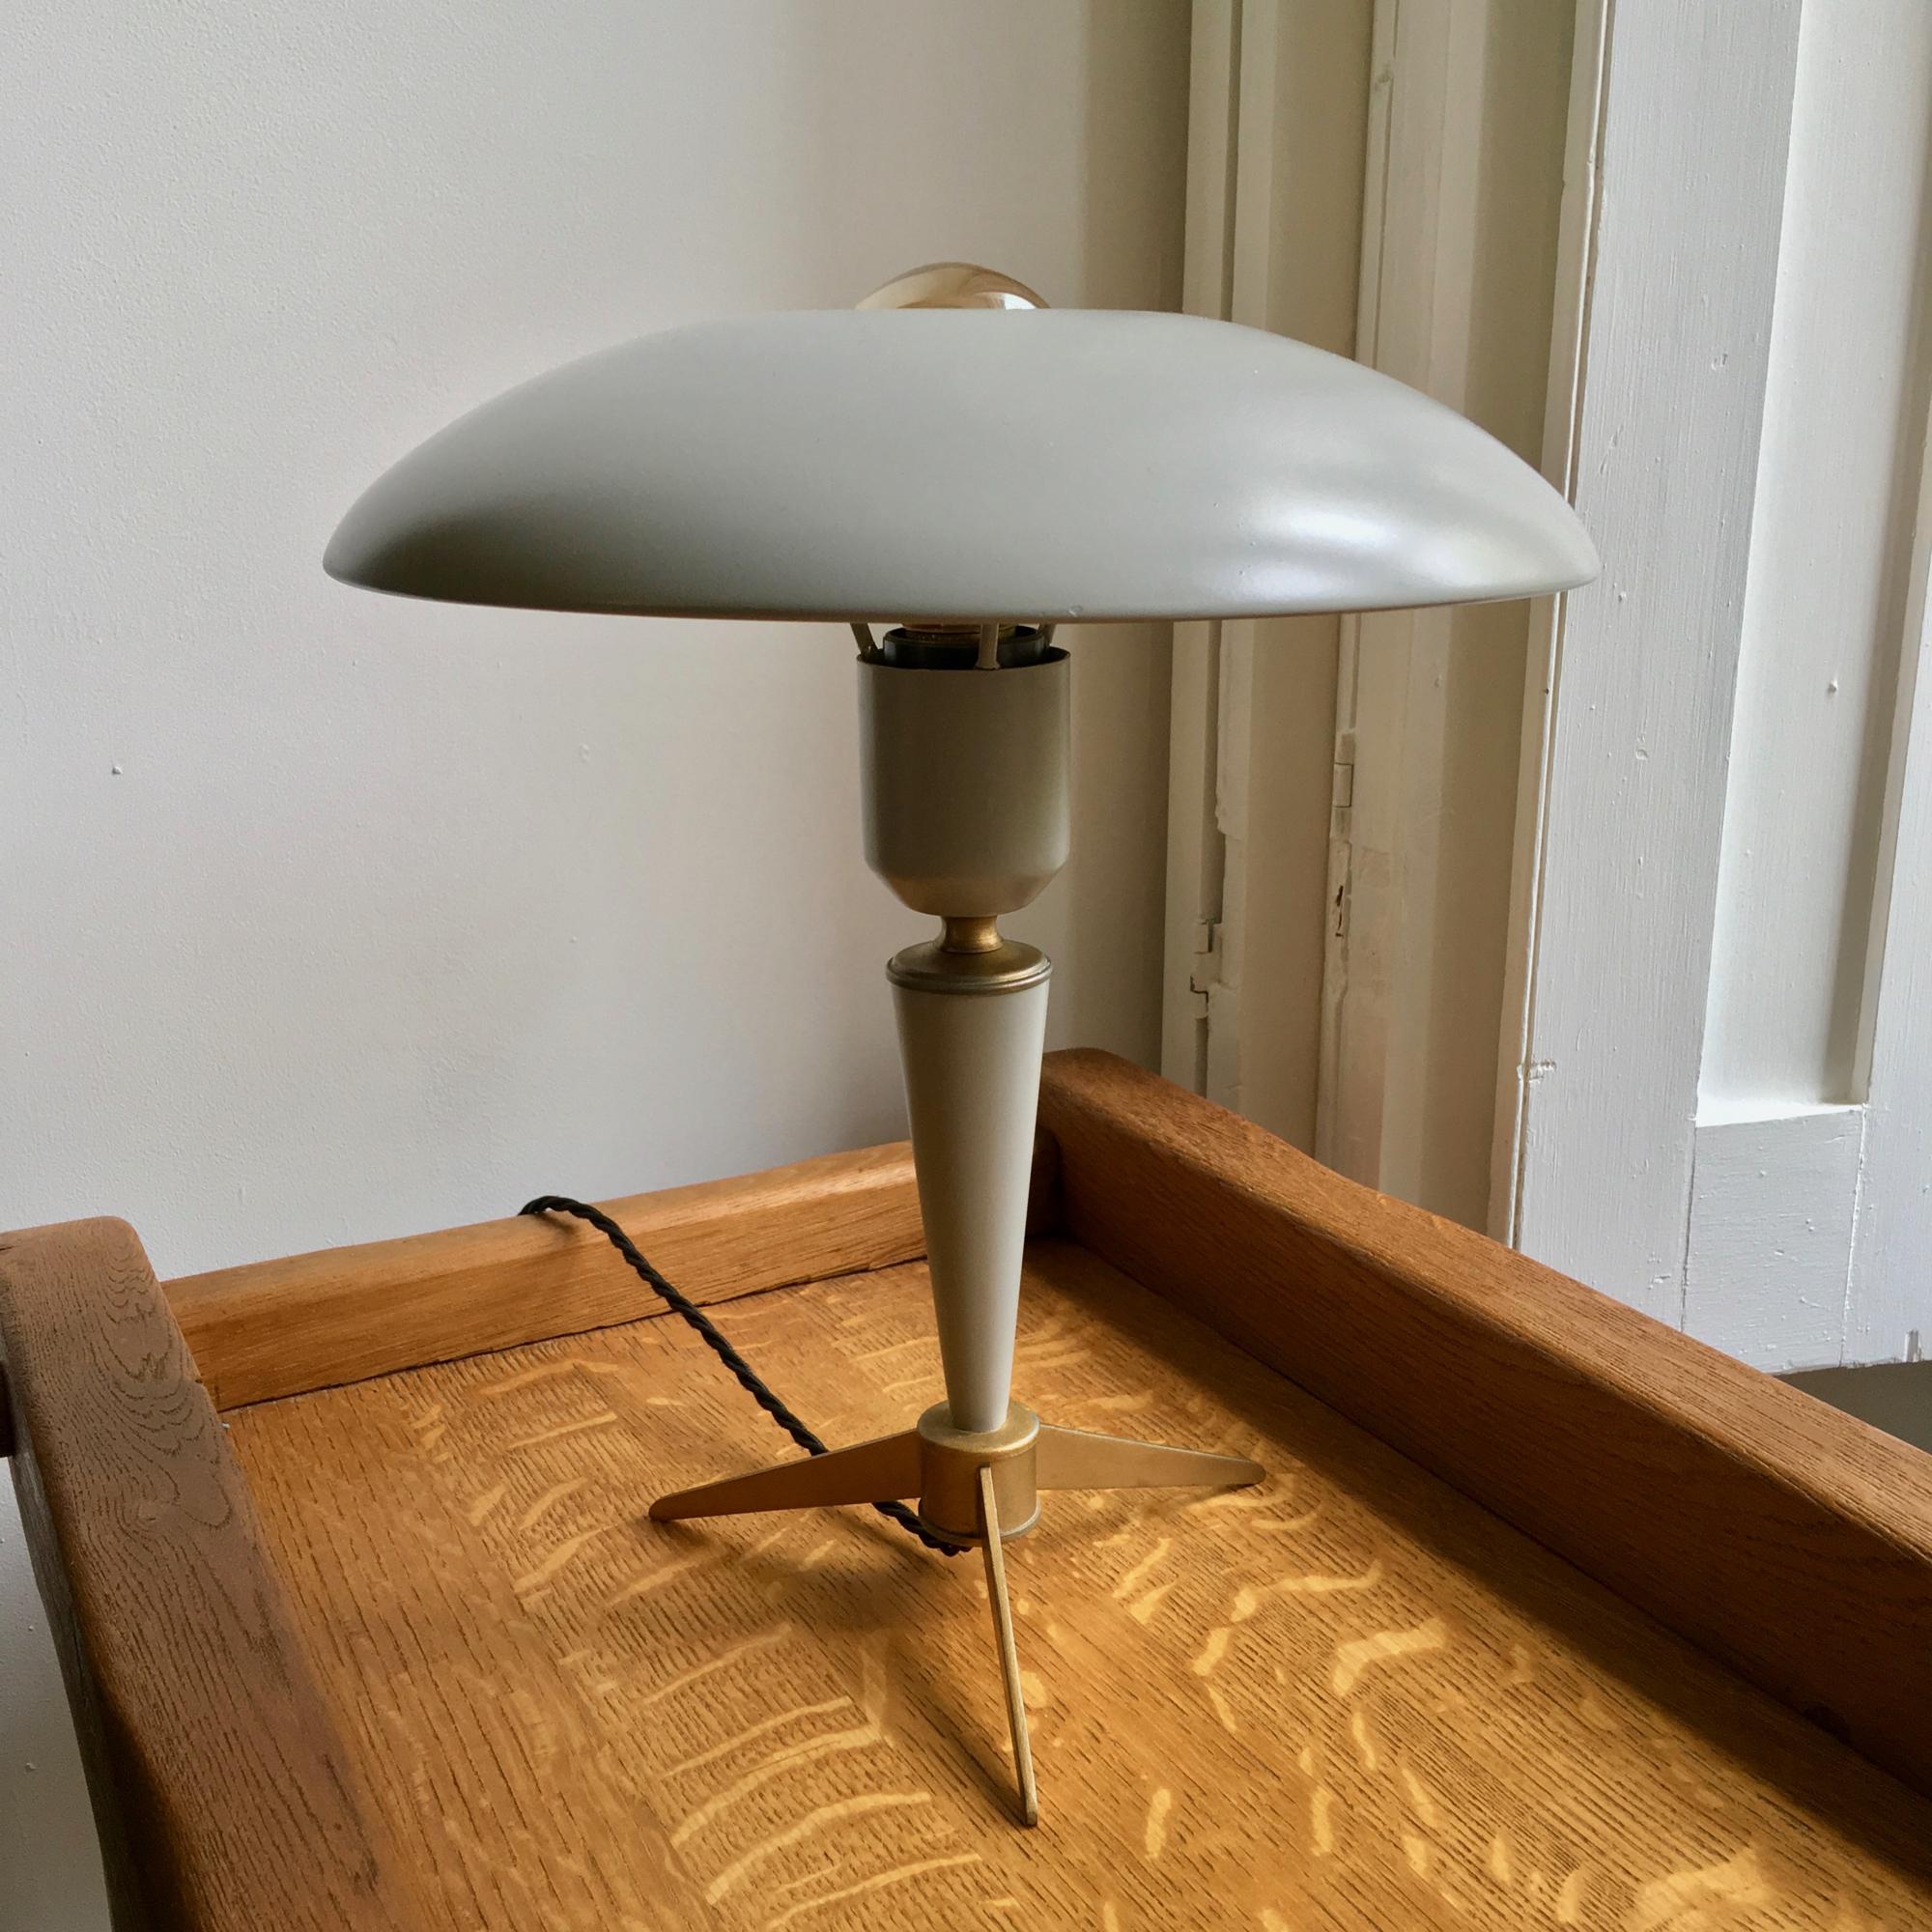 Small midcentury table lamp with tripod base by Louis Kalff for the Dutch manufacturer Philips.

A very nice design which channels light above and below the shade, often shown with a chrome or gold crown bulb to shield the light from above the